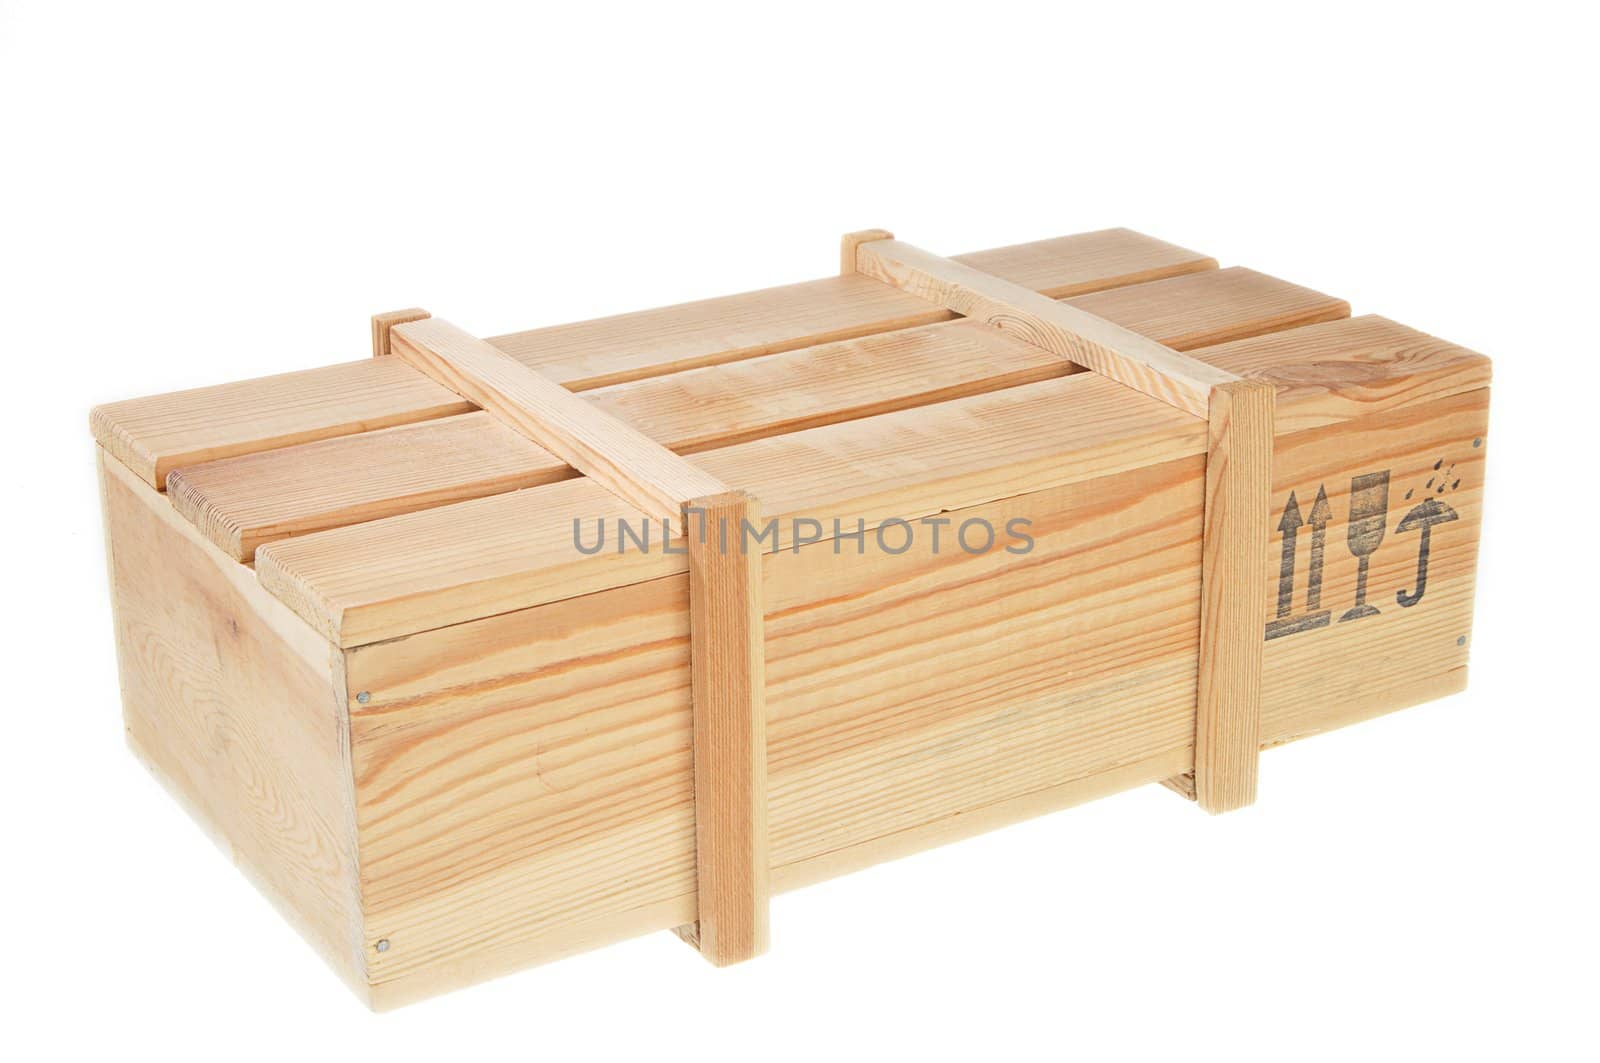 model of a wooden shipping box isolated on white background